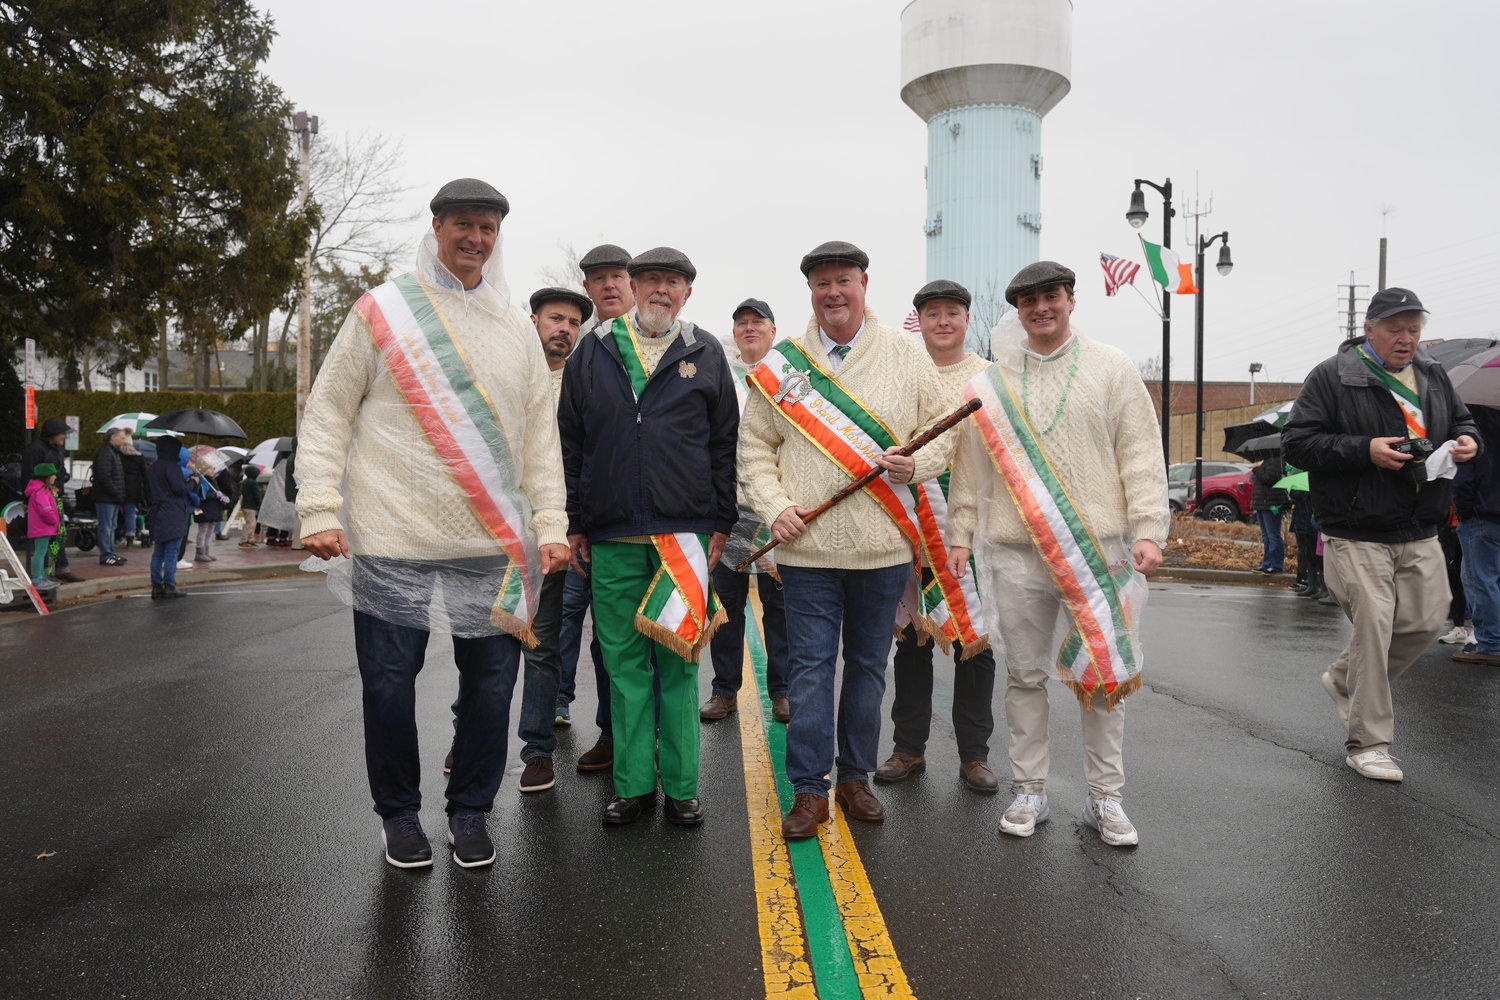 Parade Grand Marshal Tommy McNicholas, third from near left, marches down Maple Avenue with shillelagh in hand.